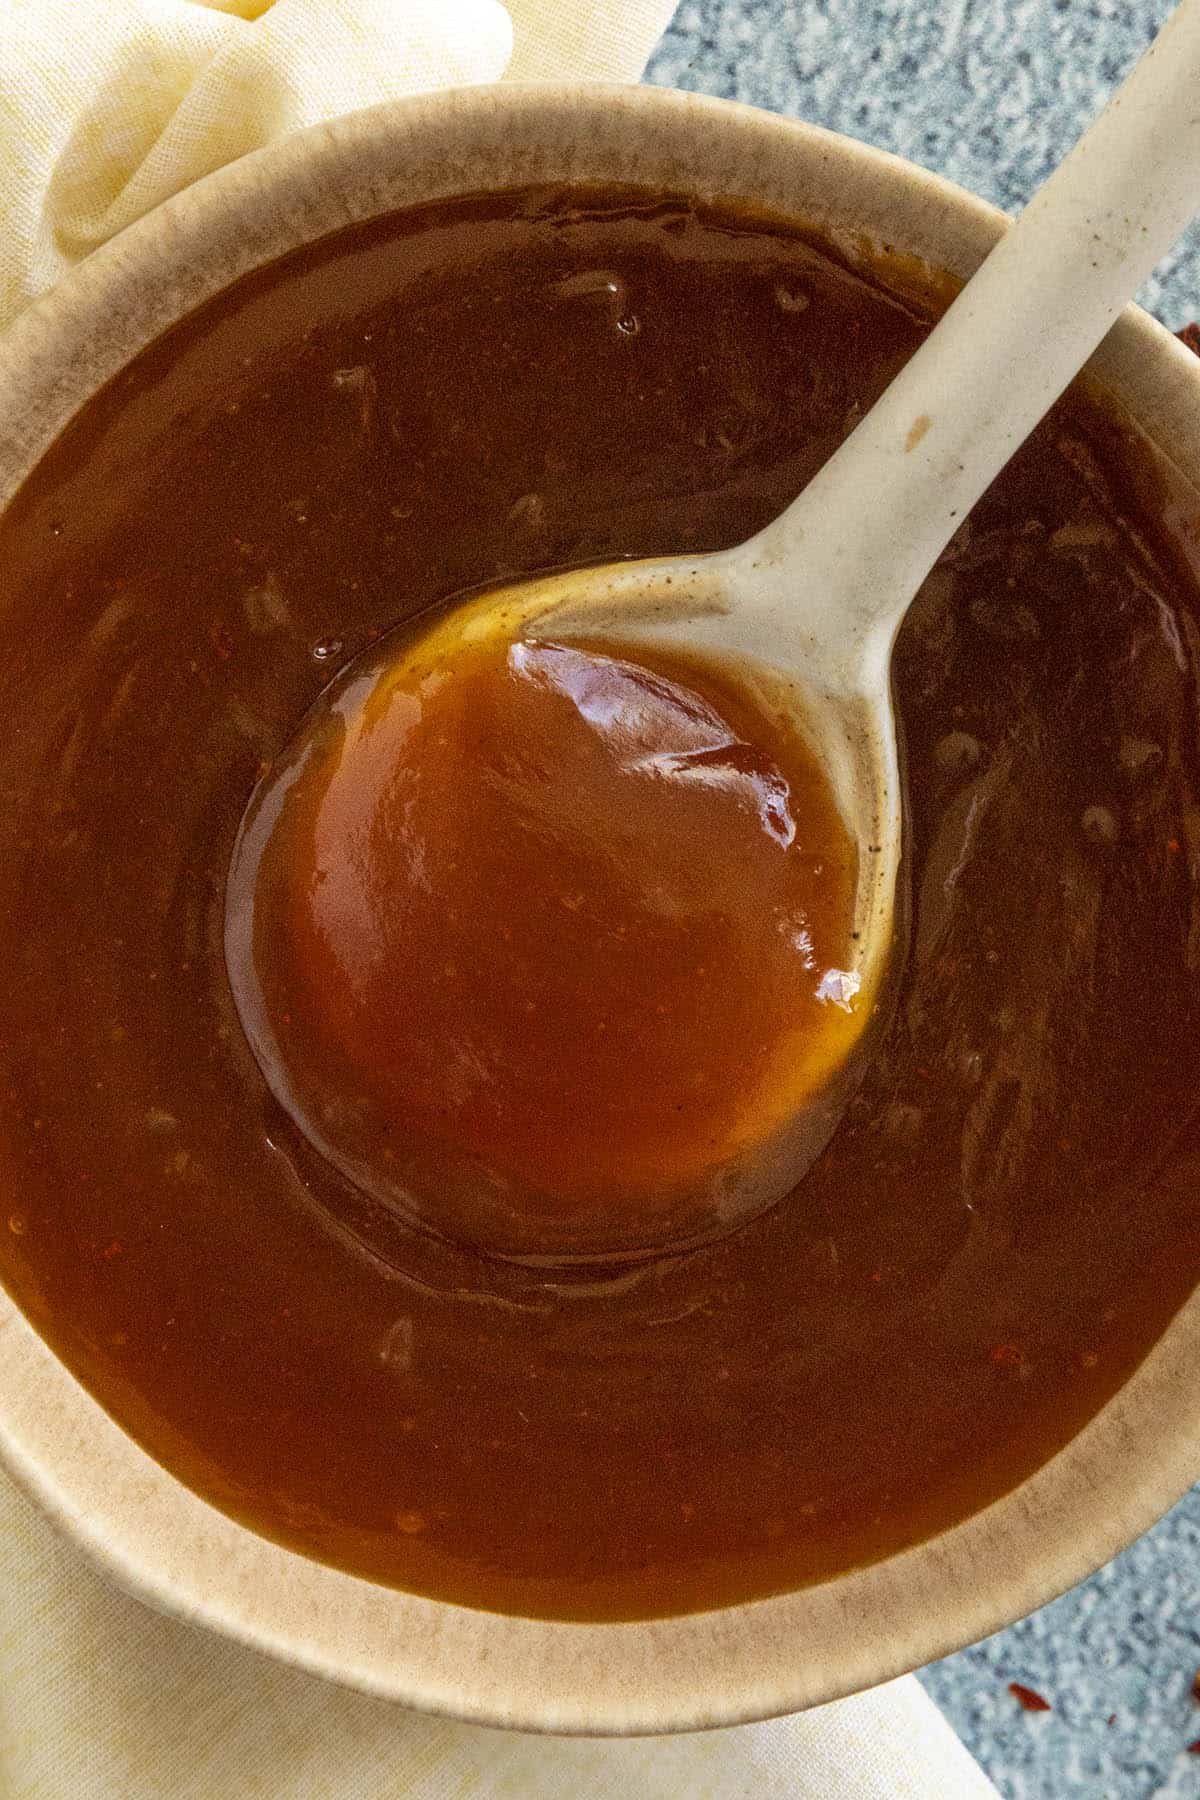 A spoon dipped into Sweet and Sour Sauce